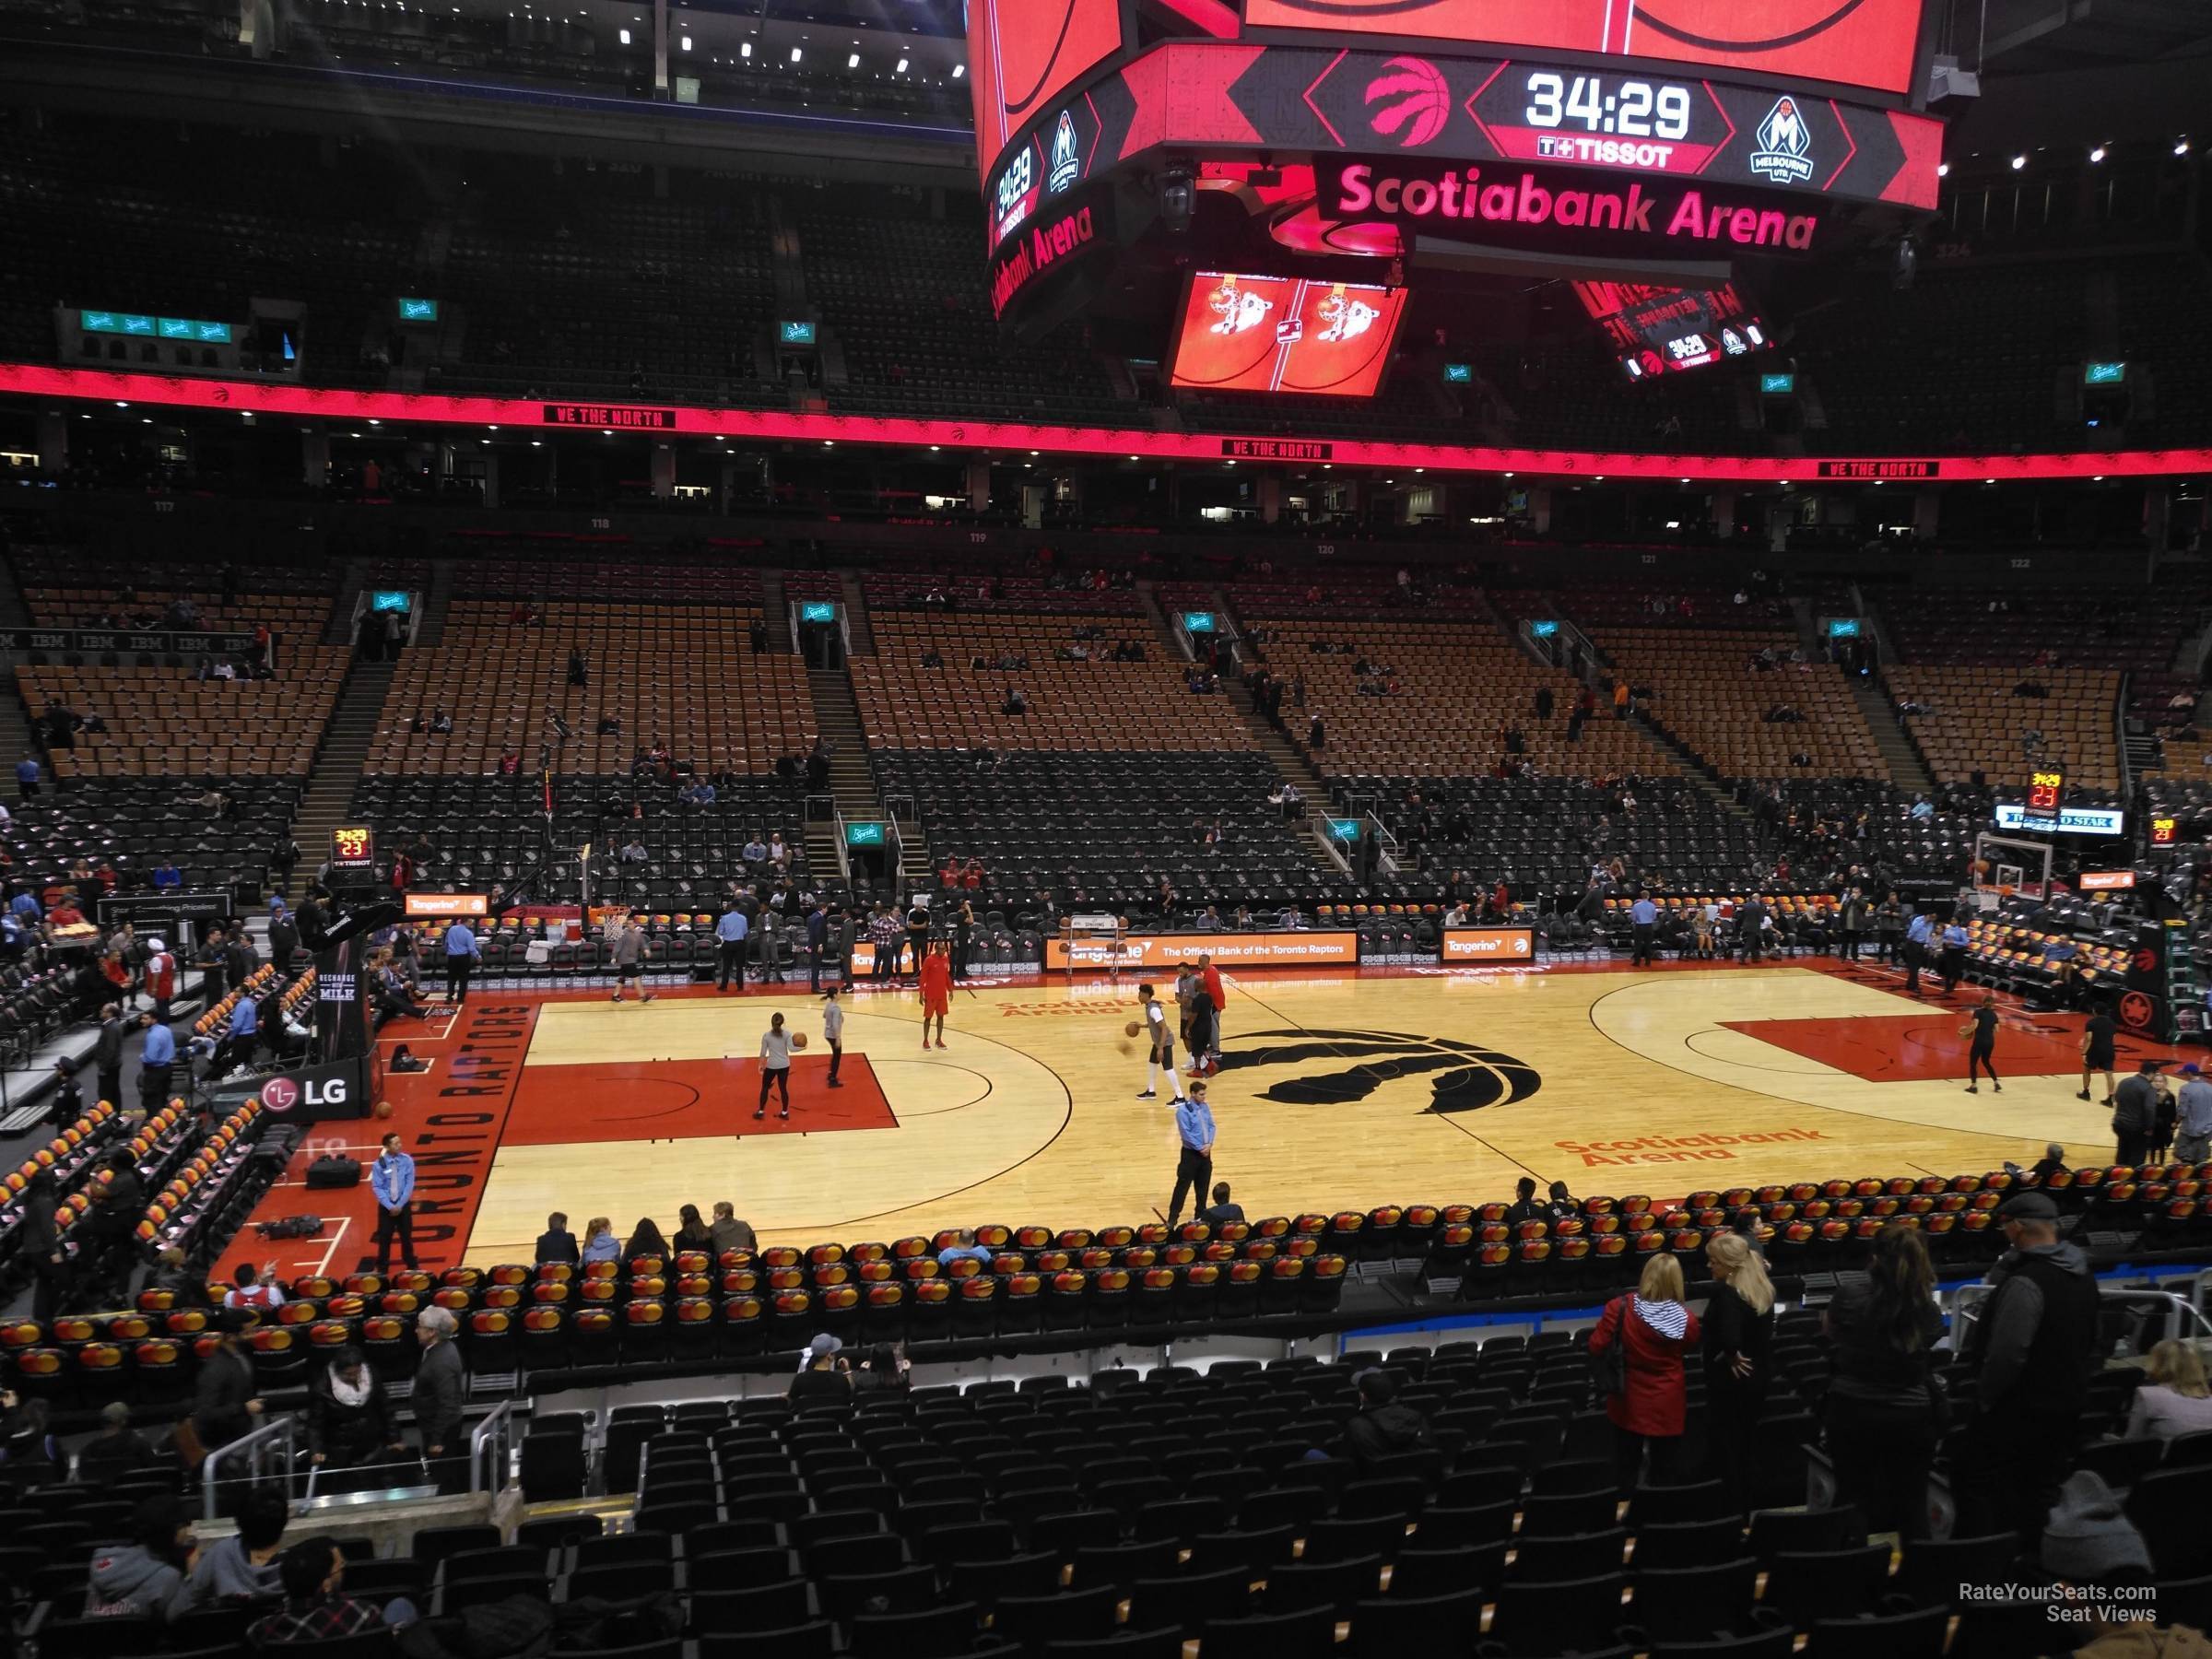 section 109, row 28 seat view  for basketball - scotiabank arena